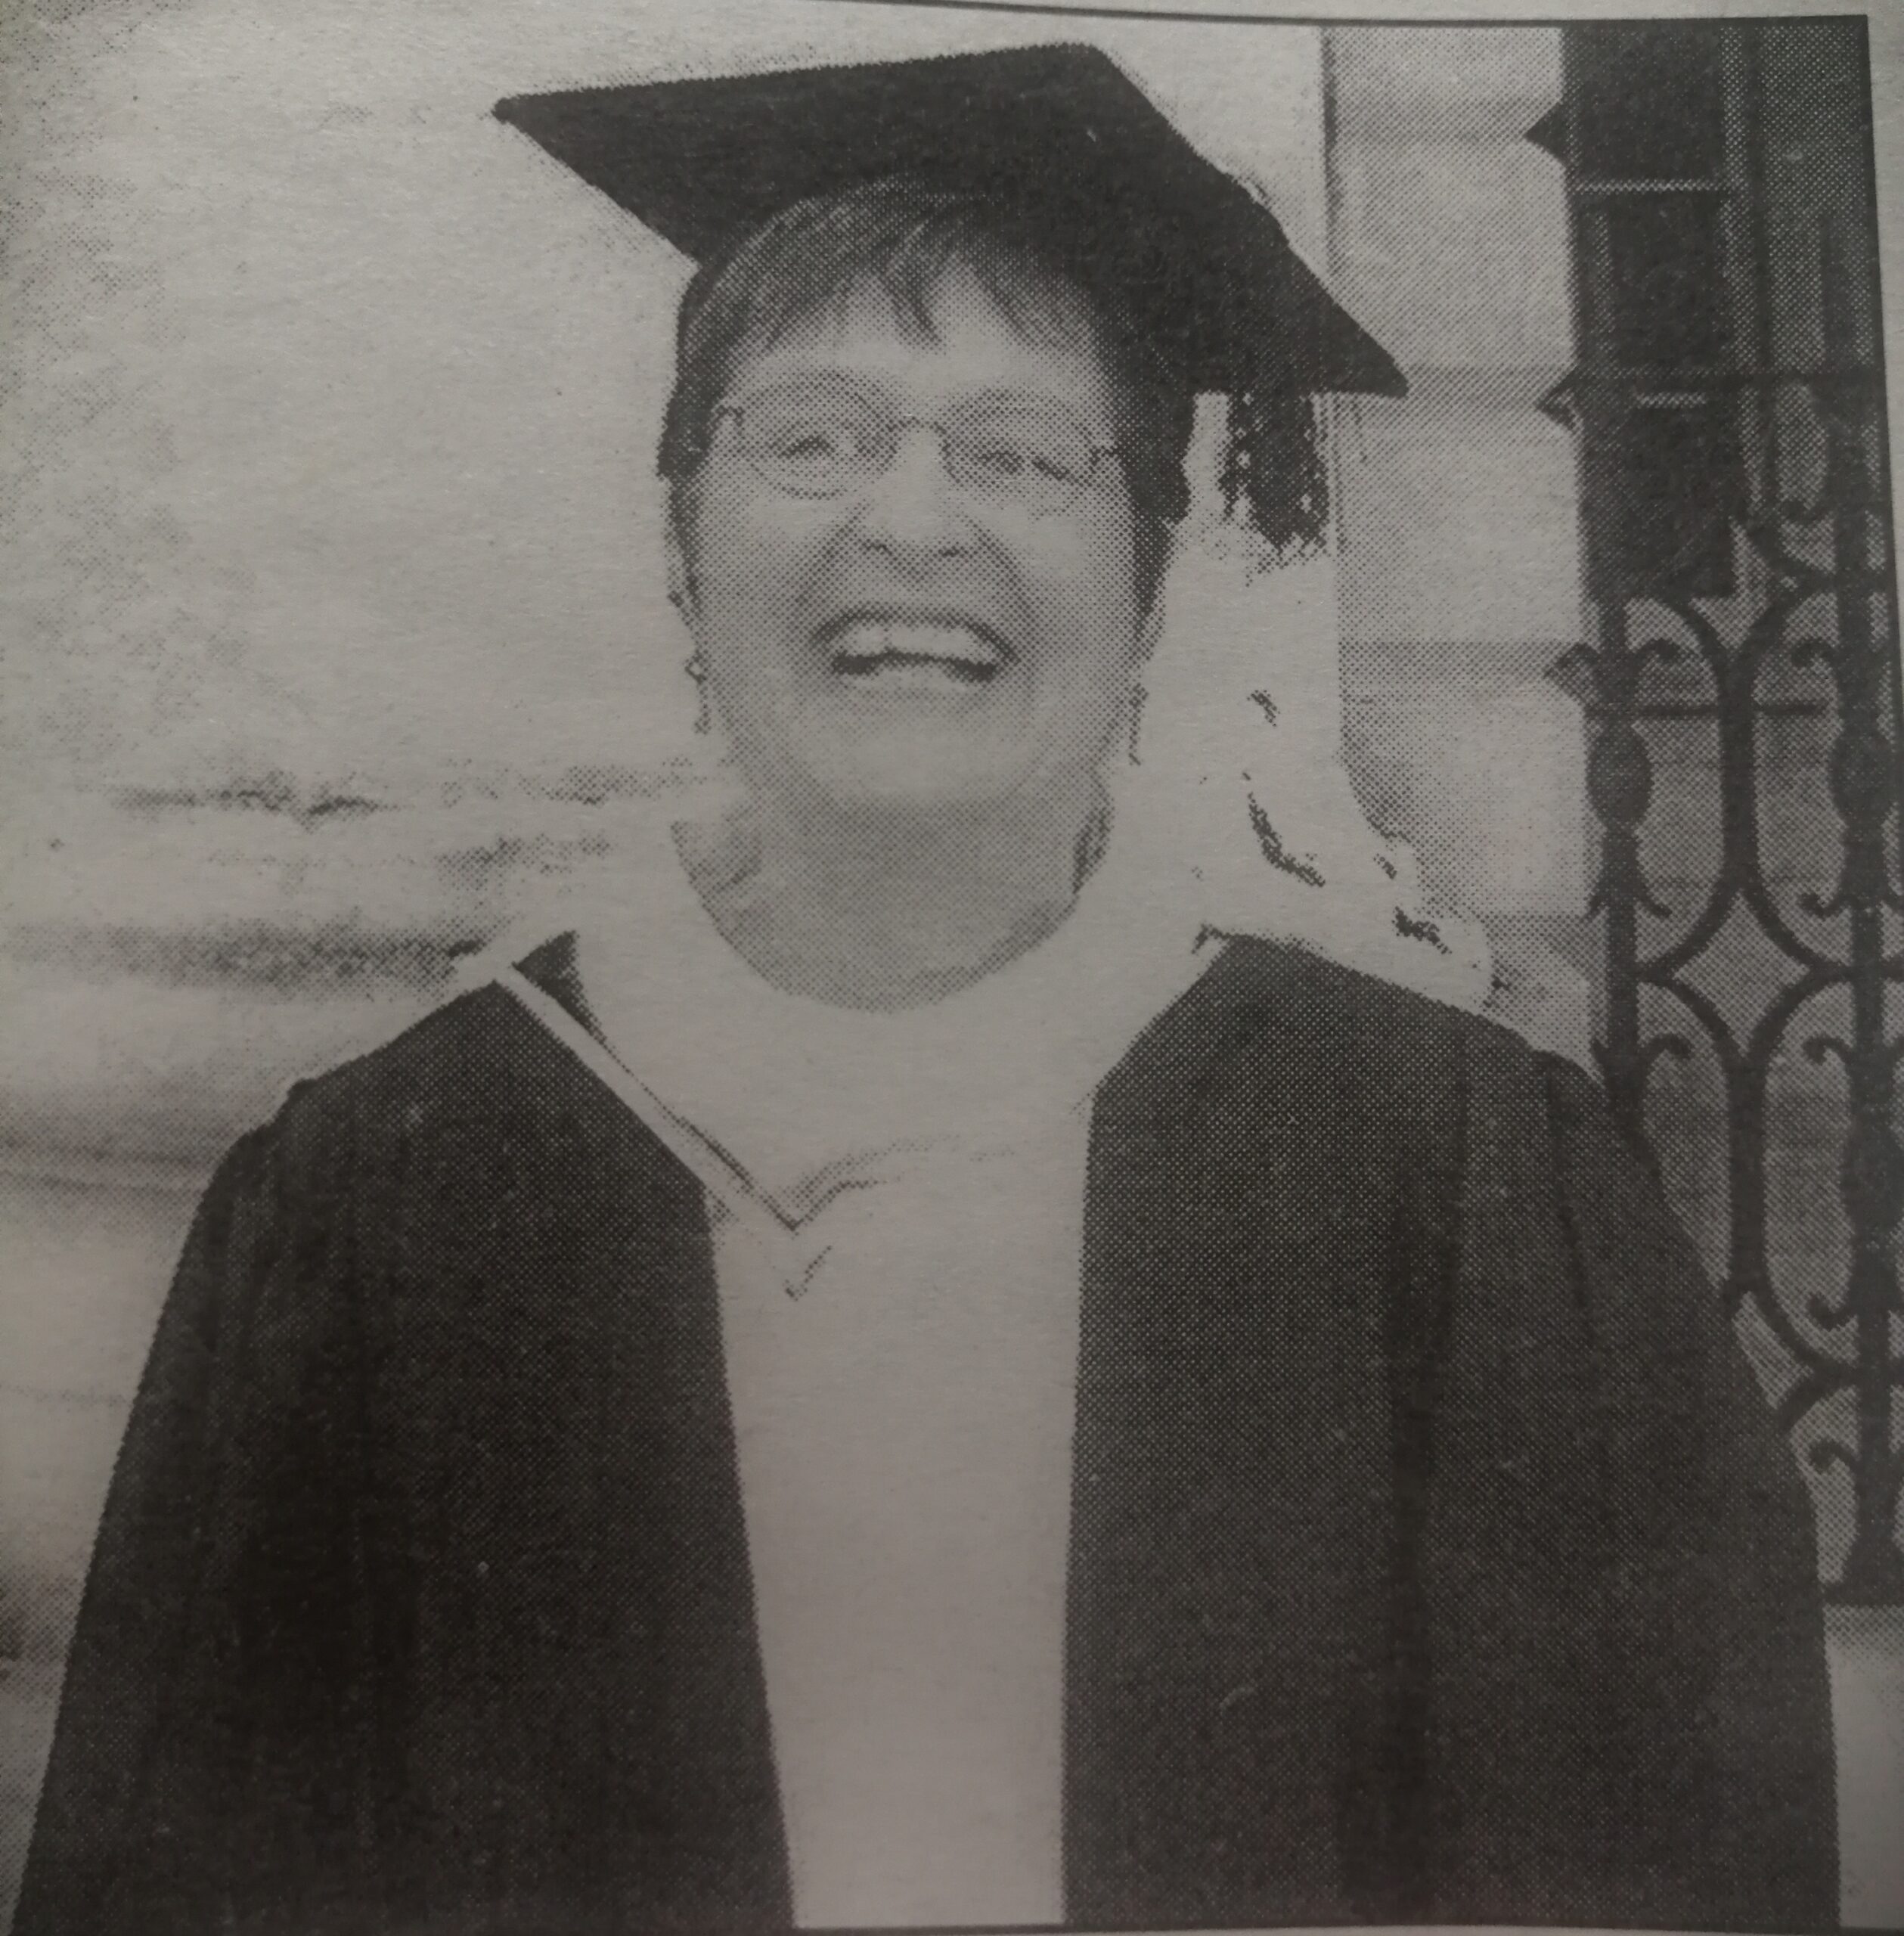 Ann Ingle receives an Honours degree from Trinity College, Ann was also the founding chairperson of Sandymount Community Services.